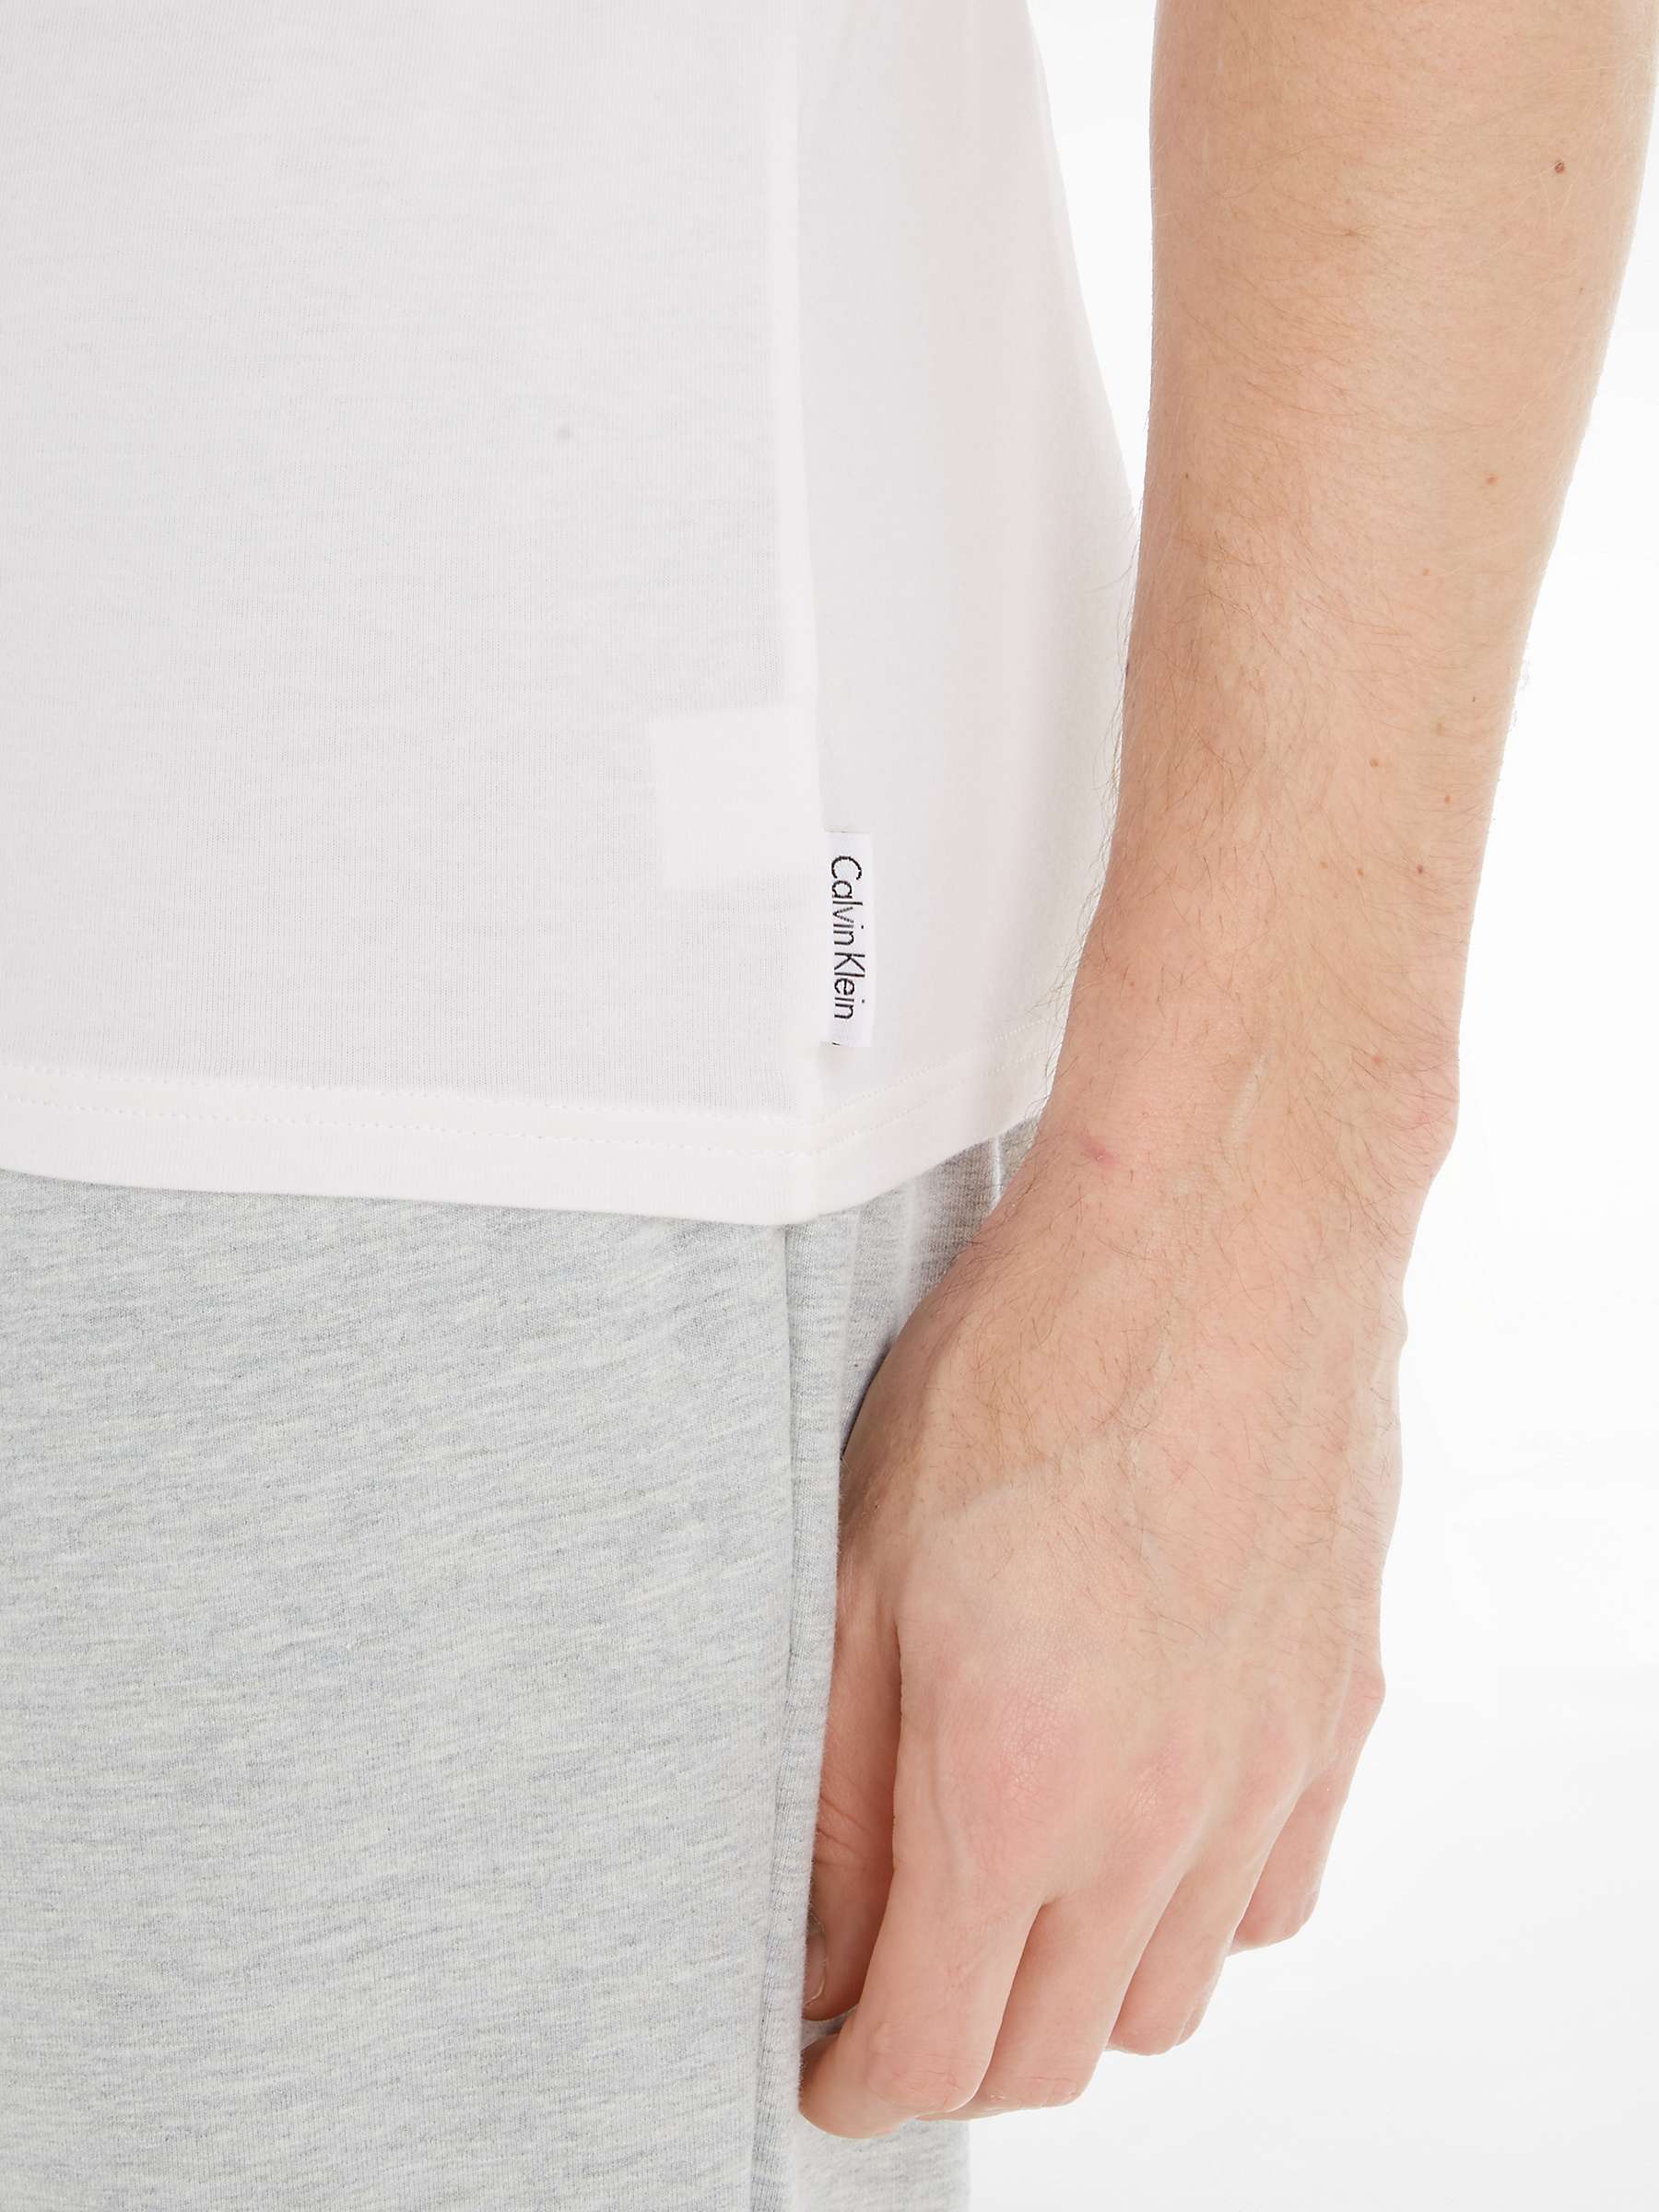 Buy Calvin Klein Modern Cotton Stretch Lounge T-Shirt, Pack of 2, White Online at johnlewis.com